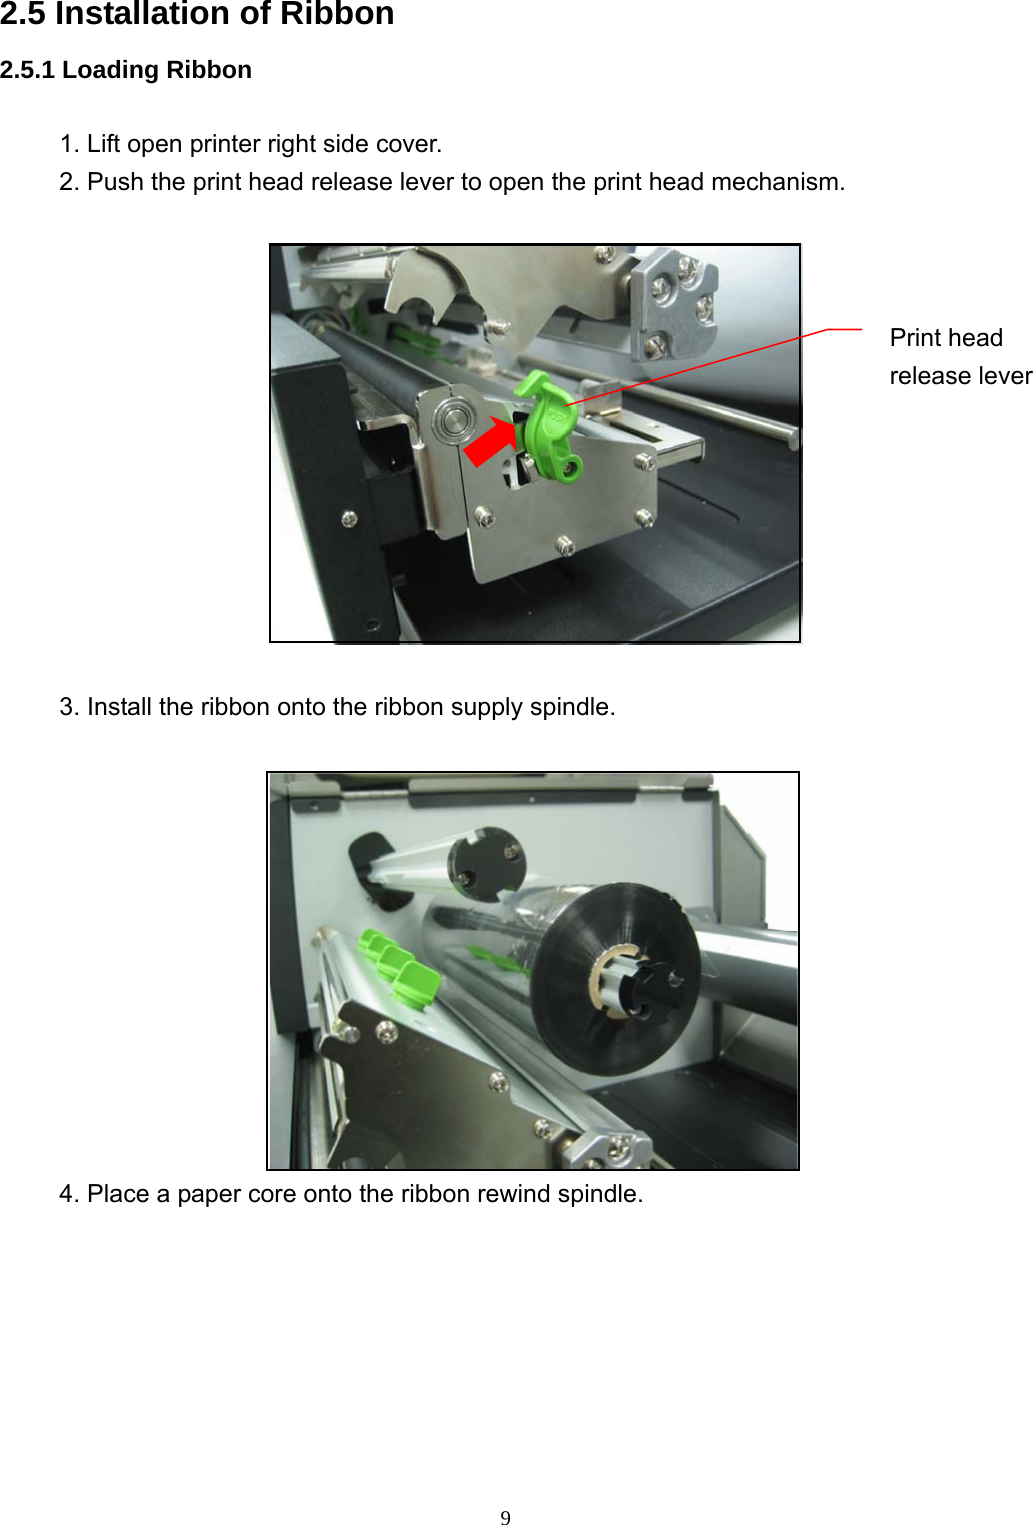  92.5 Installation of Ribbon 2.5.1 Loading Ribbon  1. Lift open printer right side cover. 2. Push the print head release lever to open the print head mechanism.    3. Install the ribbon onto the ribbon supply spindle.   4. Place a paper core onto the ribbon rewind spindle. Print head release lever 